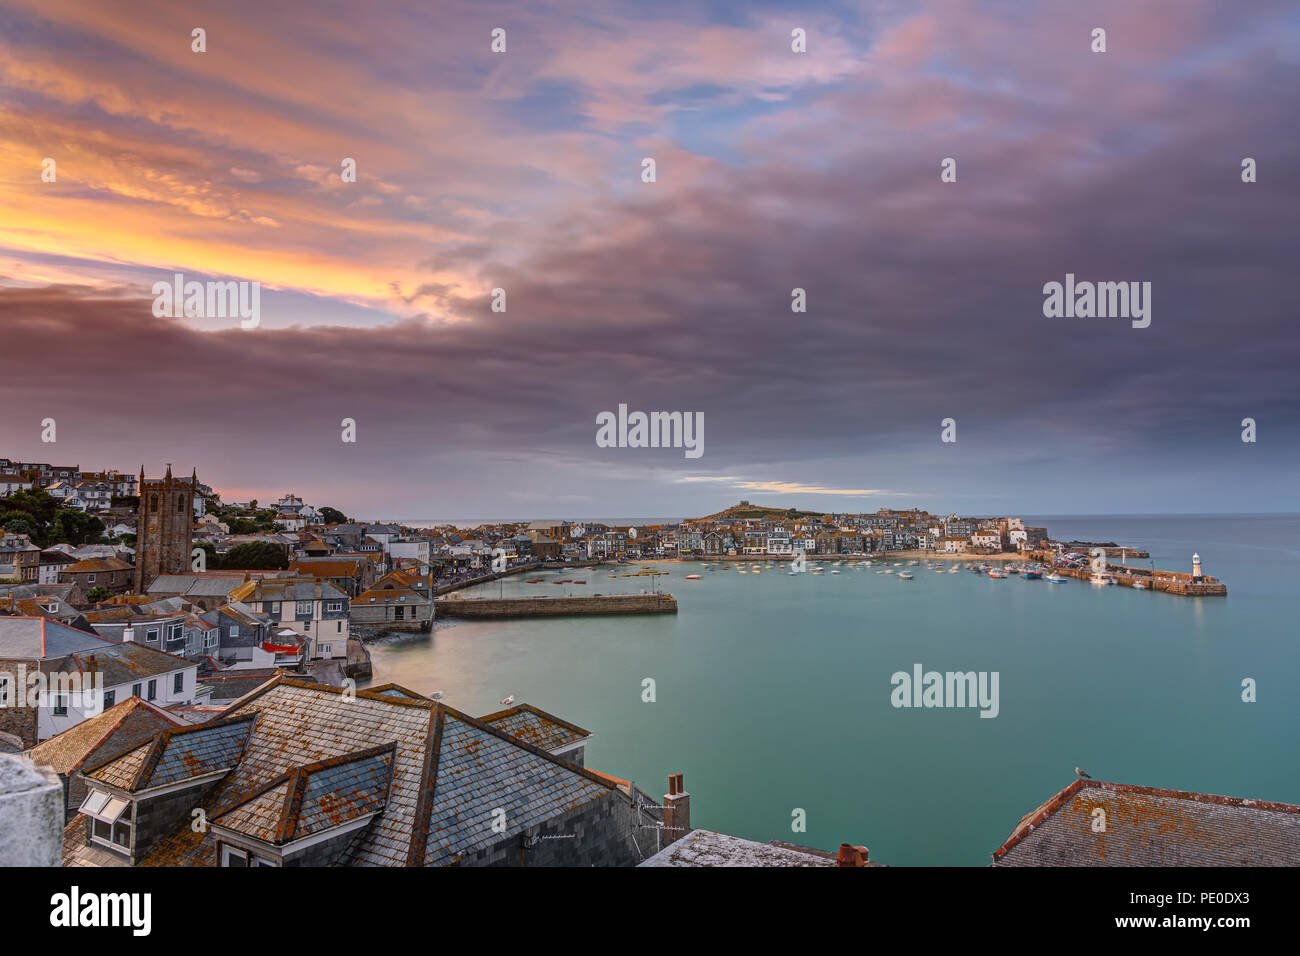 Dawn at the beautiful seaside town of St. Ives in Cornwall, England Stock Photo